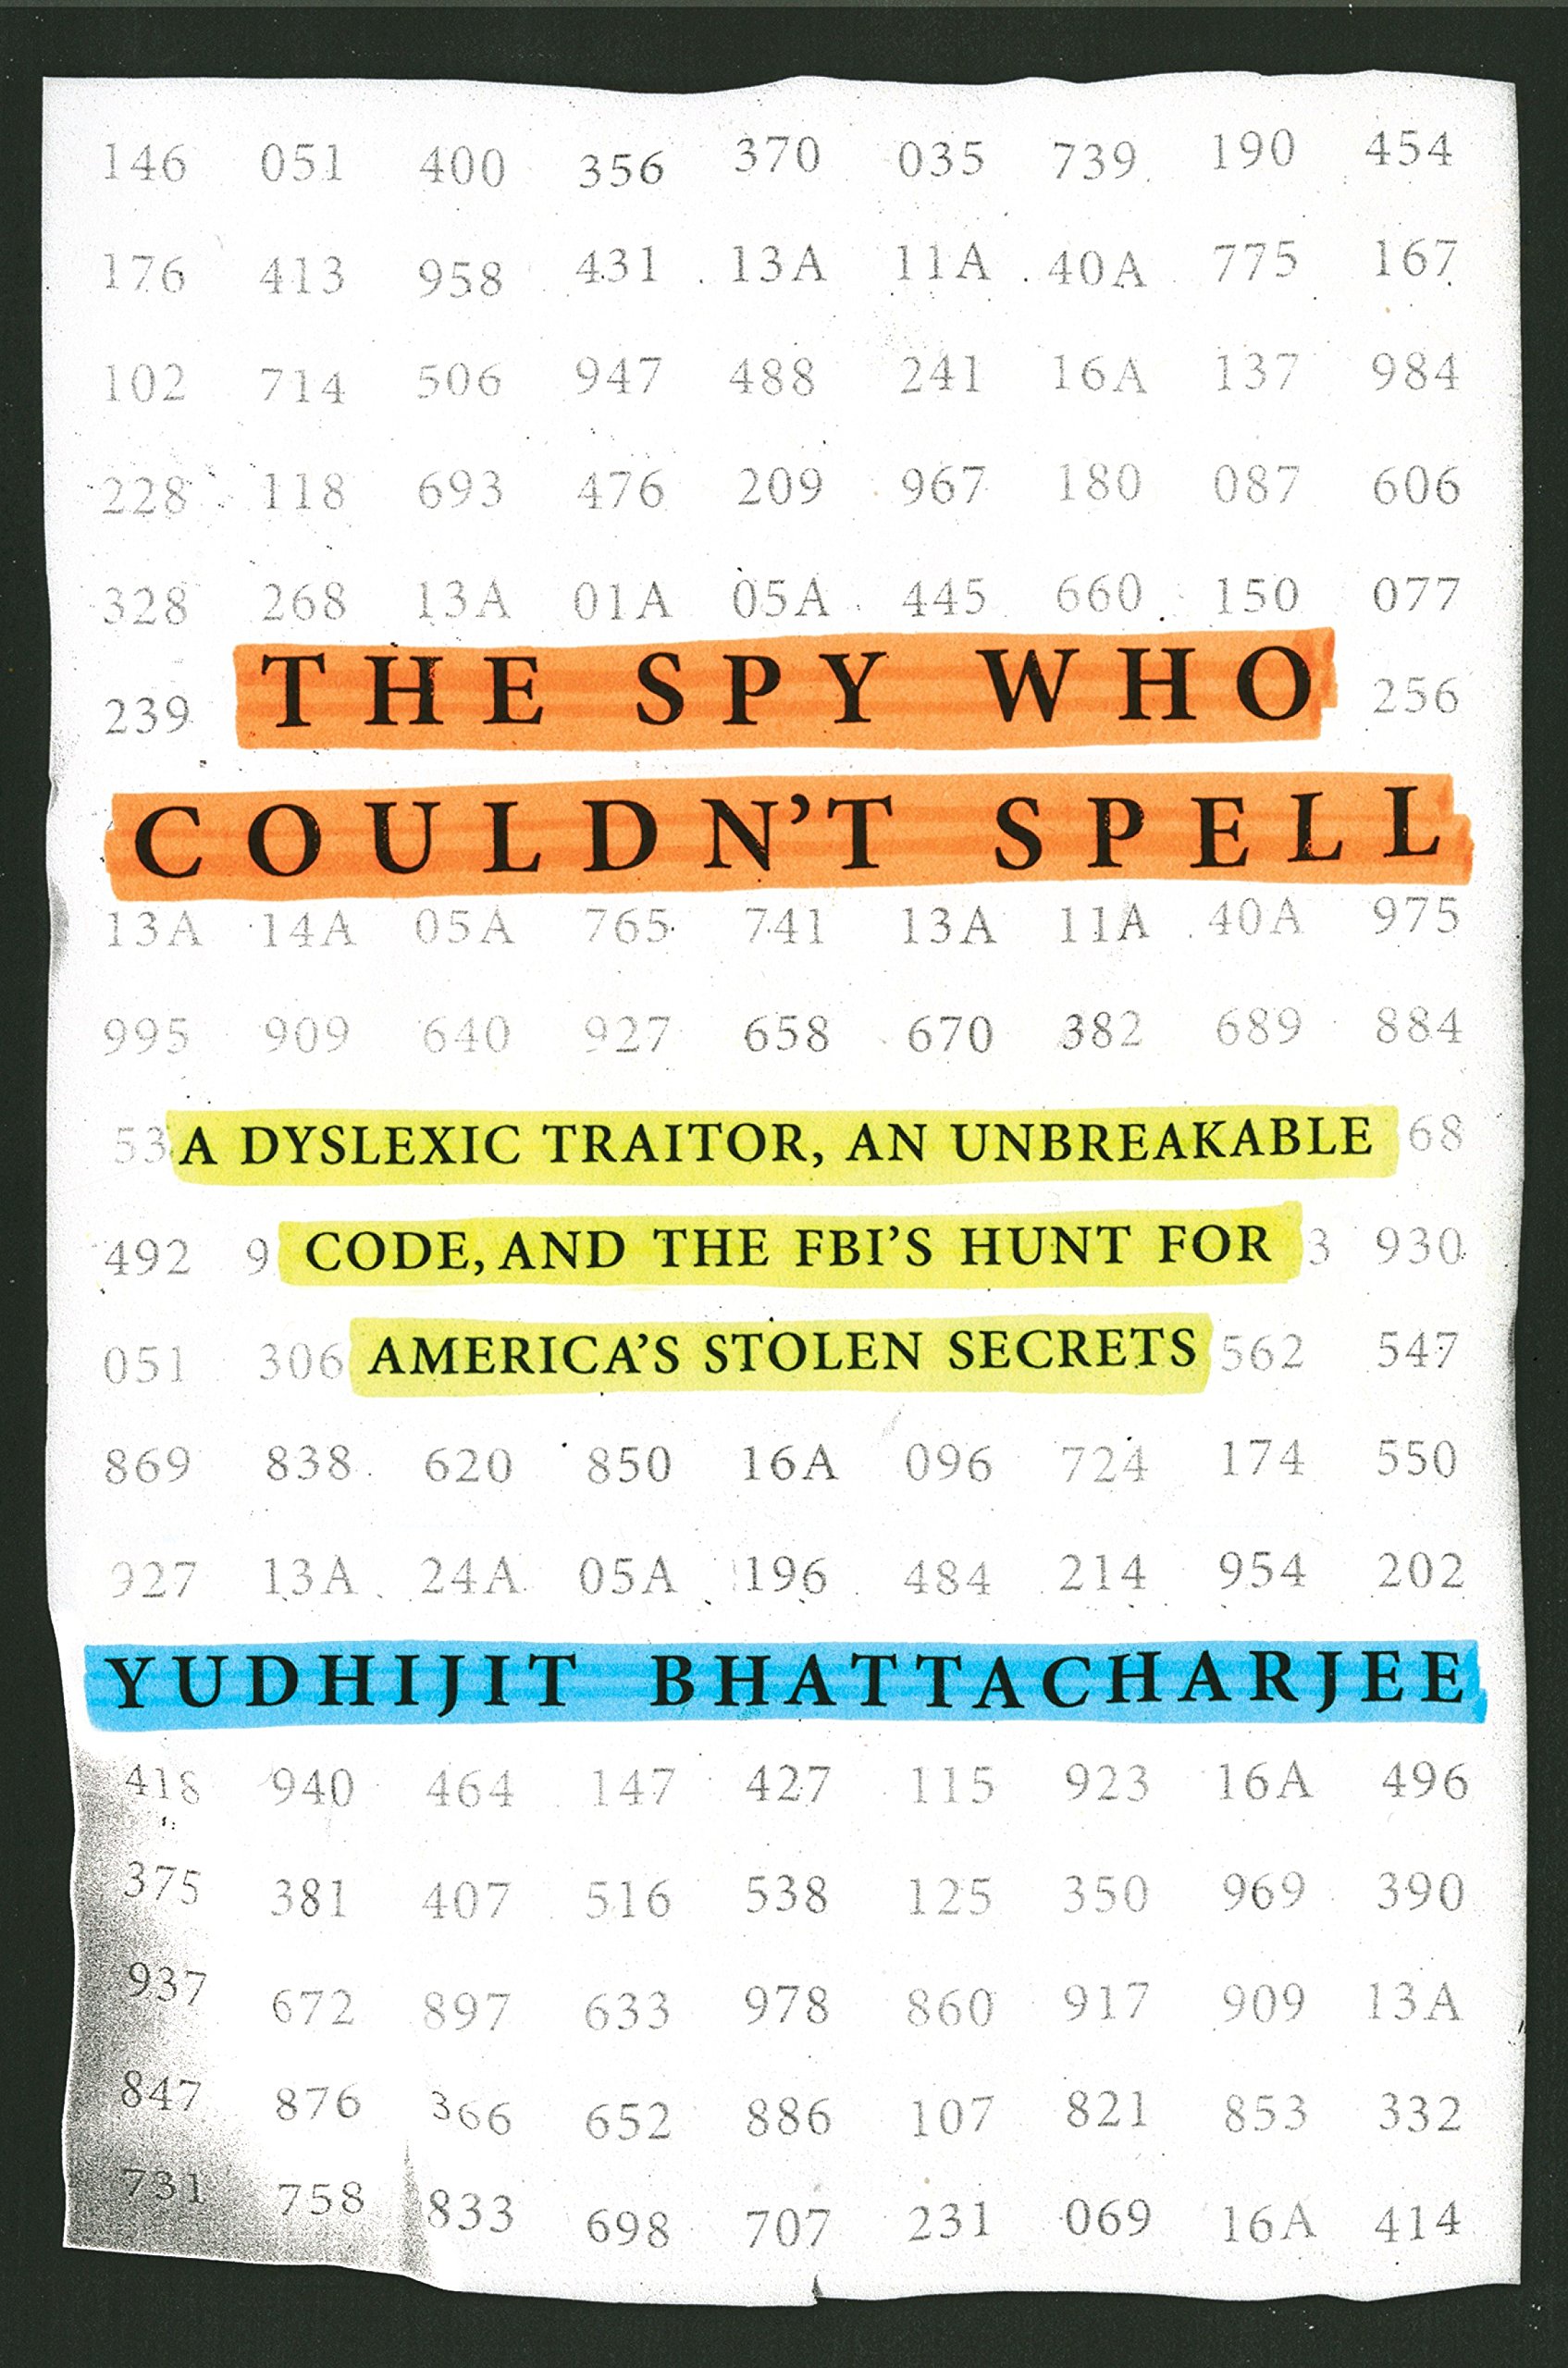 The Spy who Couldn't Spell: A Dyslexic Traitor, an Unbreakable Code, and the FBI's Hunt for America's Stolen Secrets